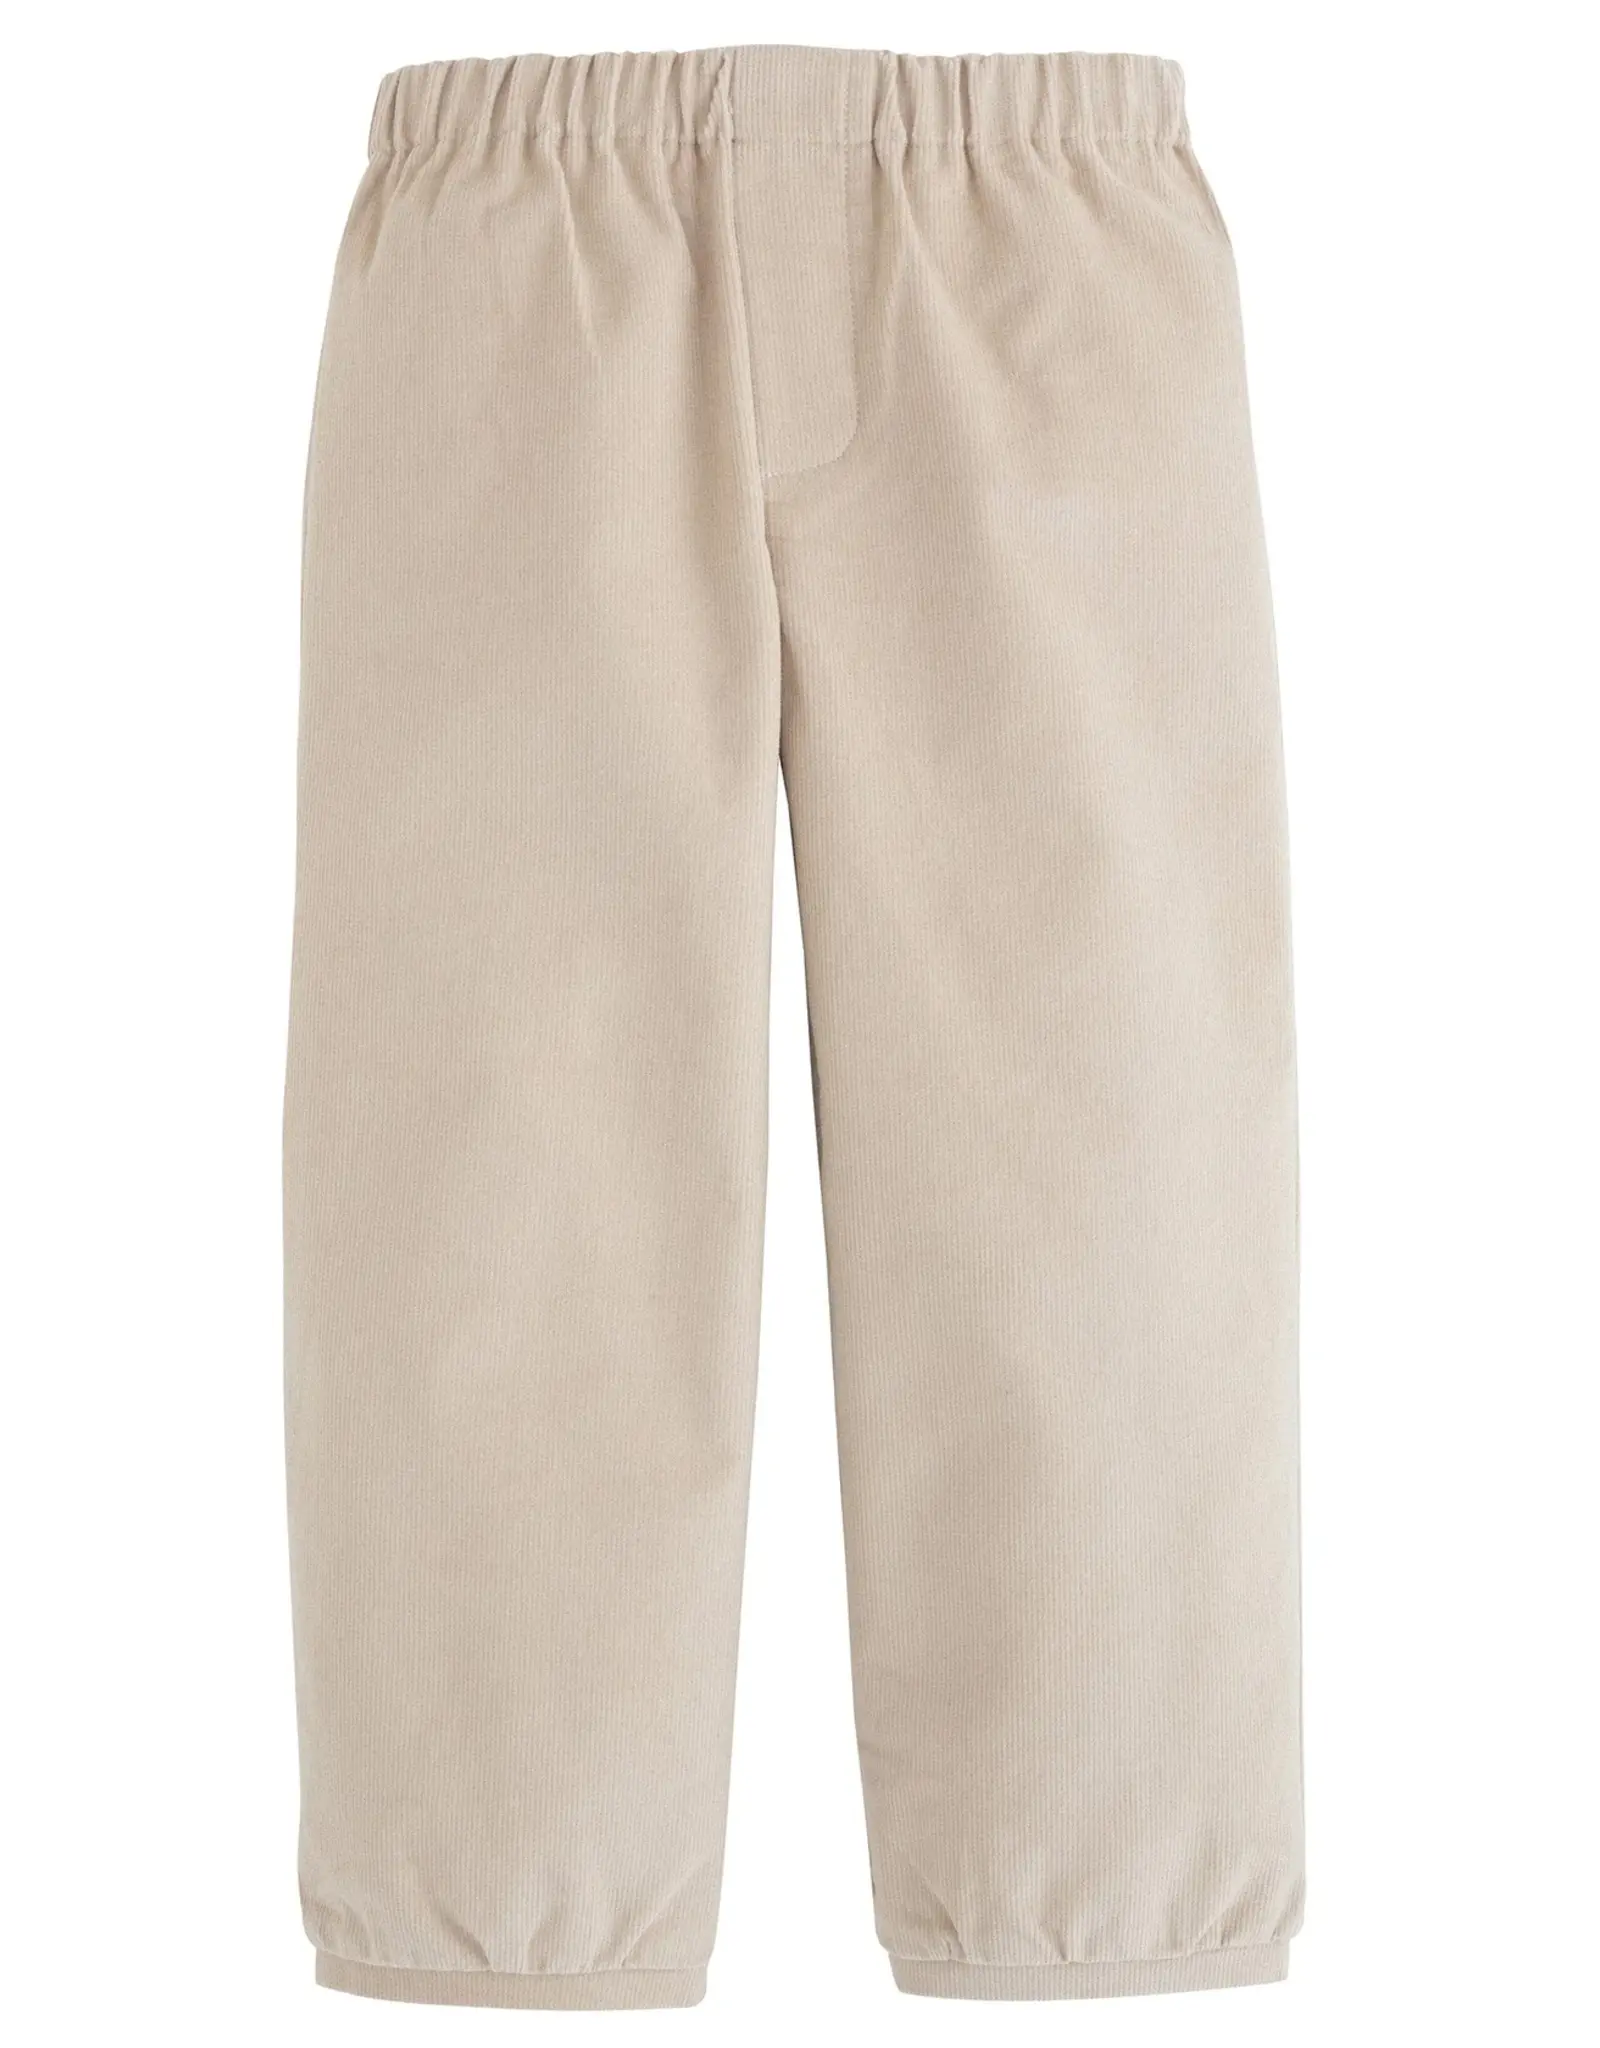 Little English Banded Pant